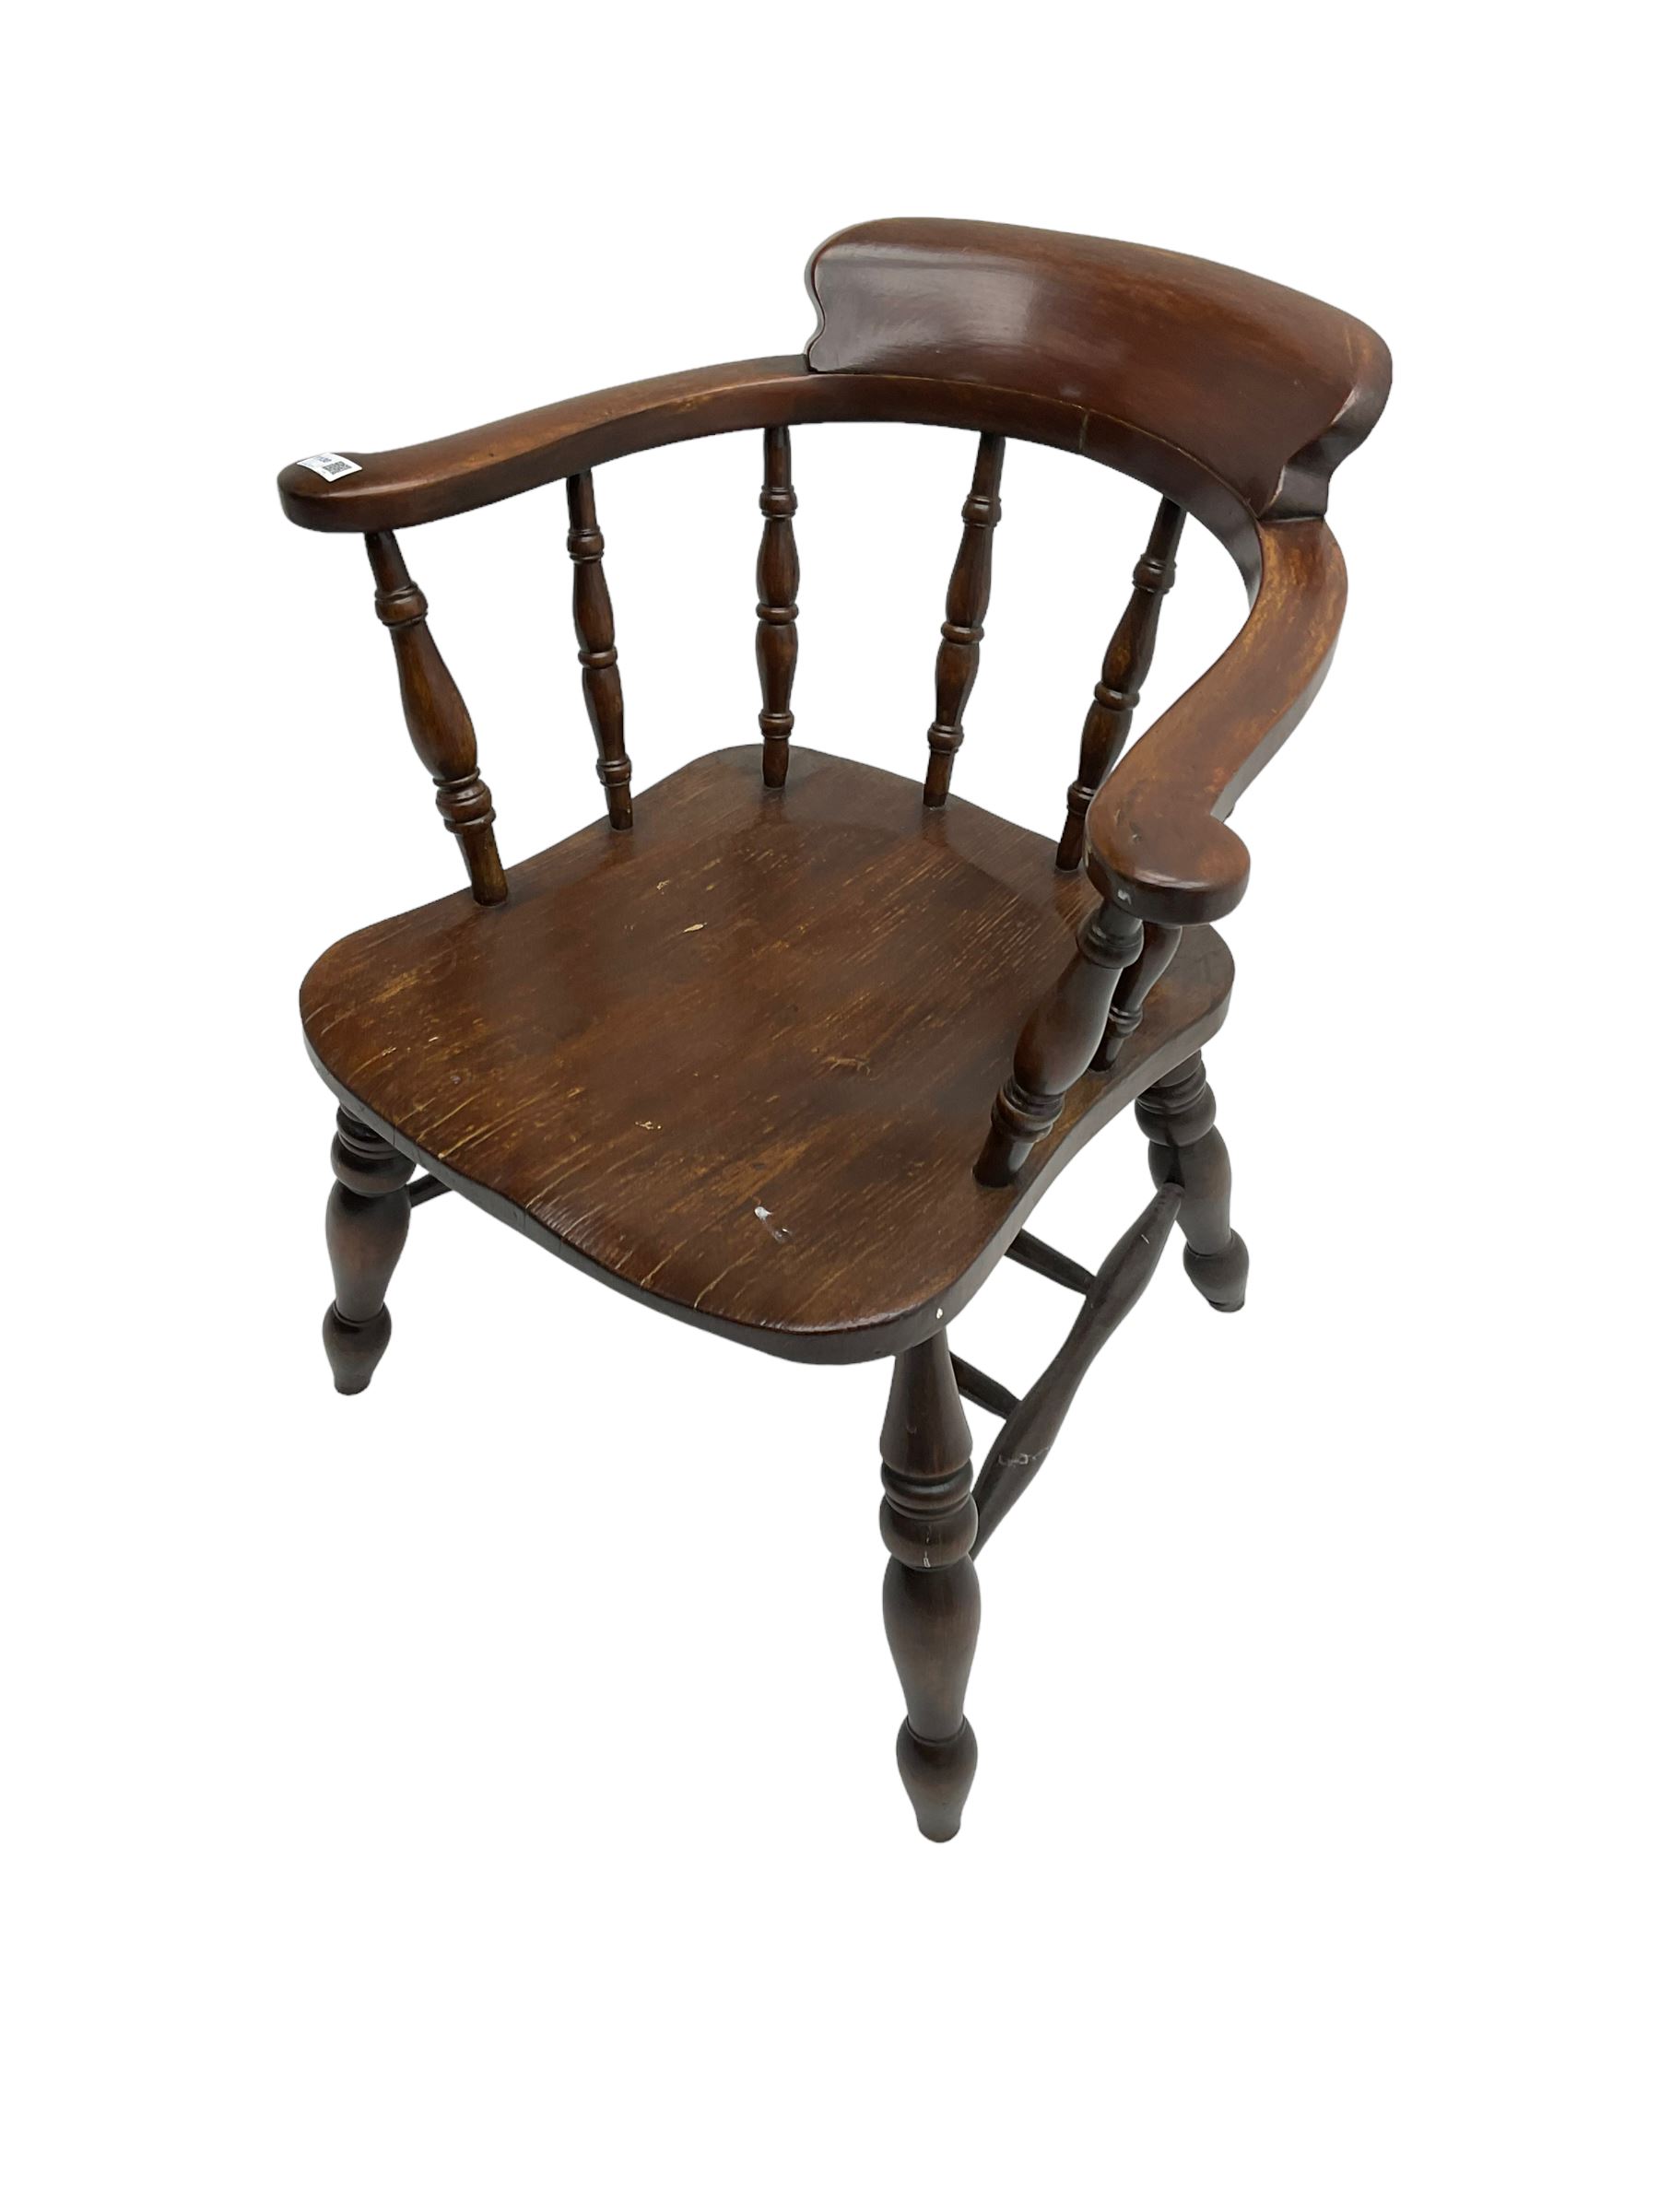 20th century elm and beech Captain's elbow chair - Image 6 of 6